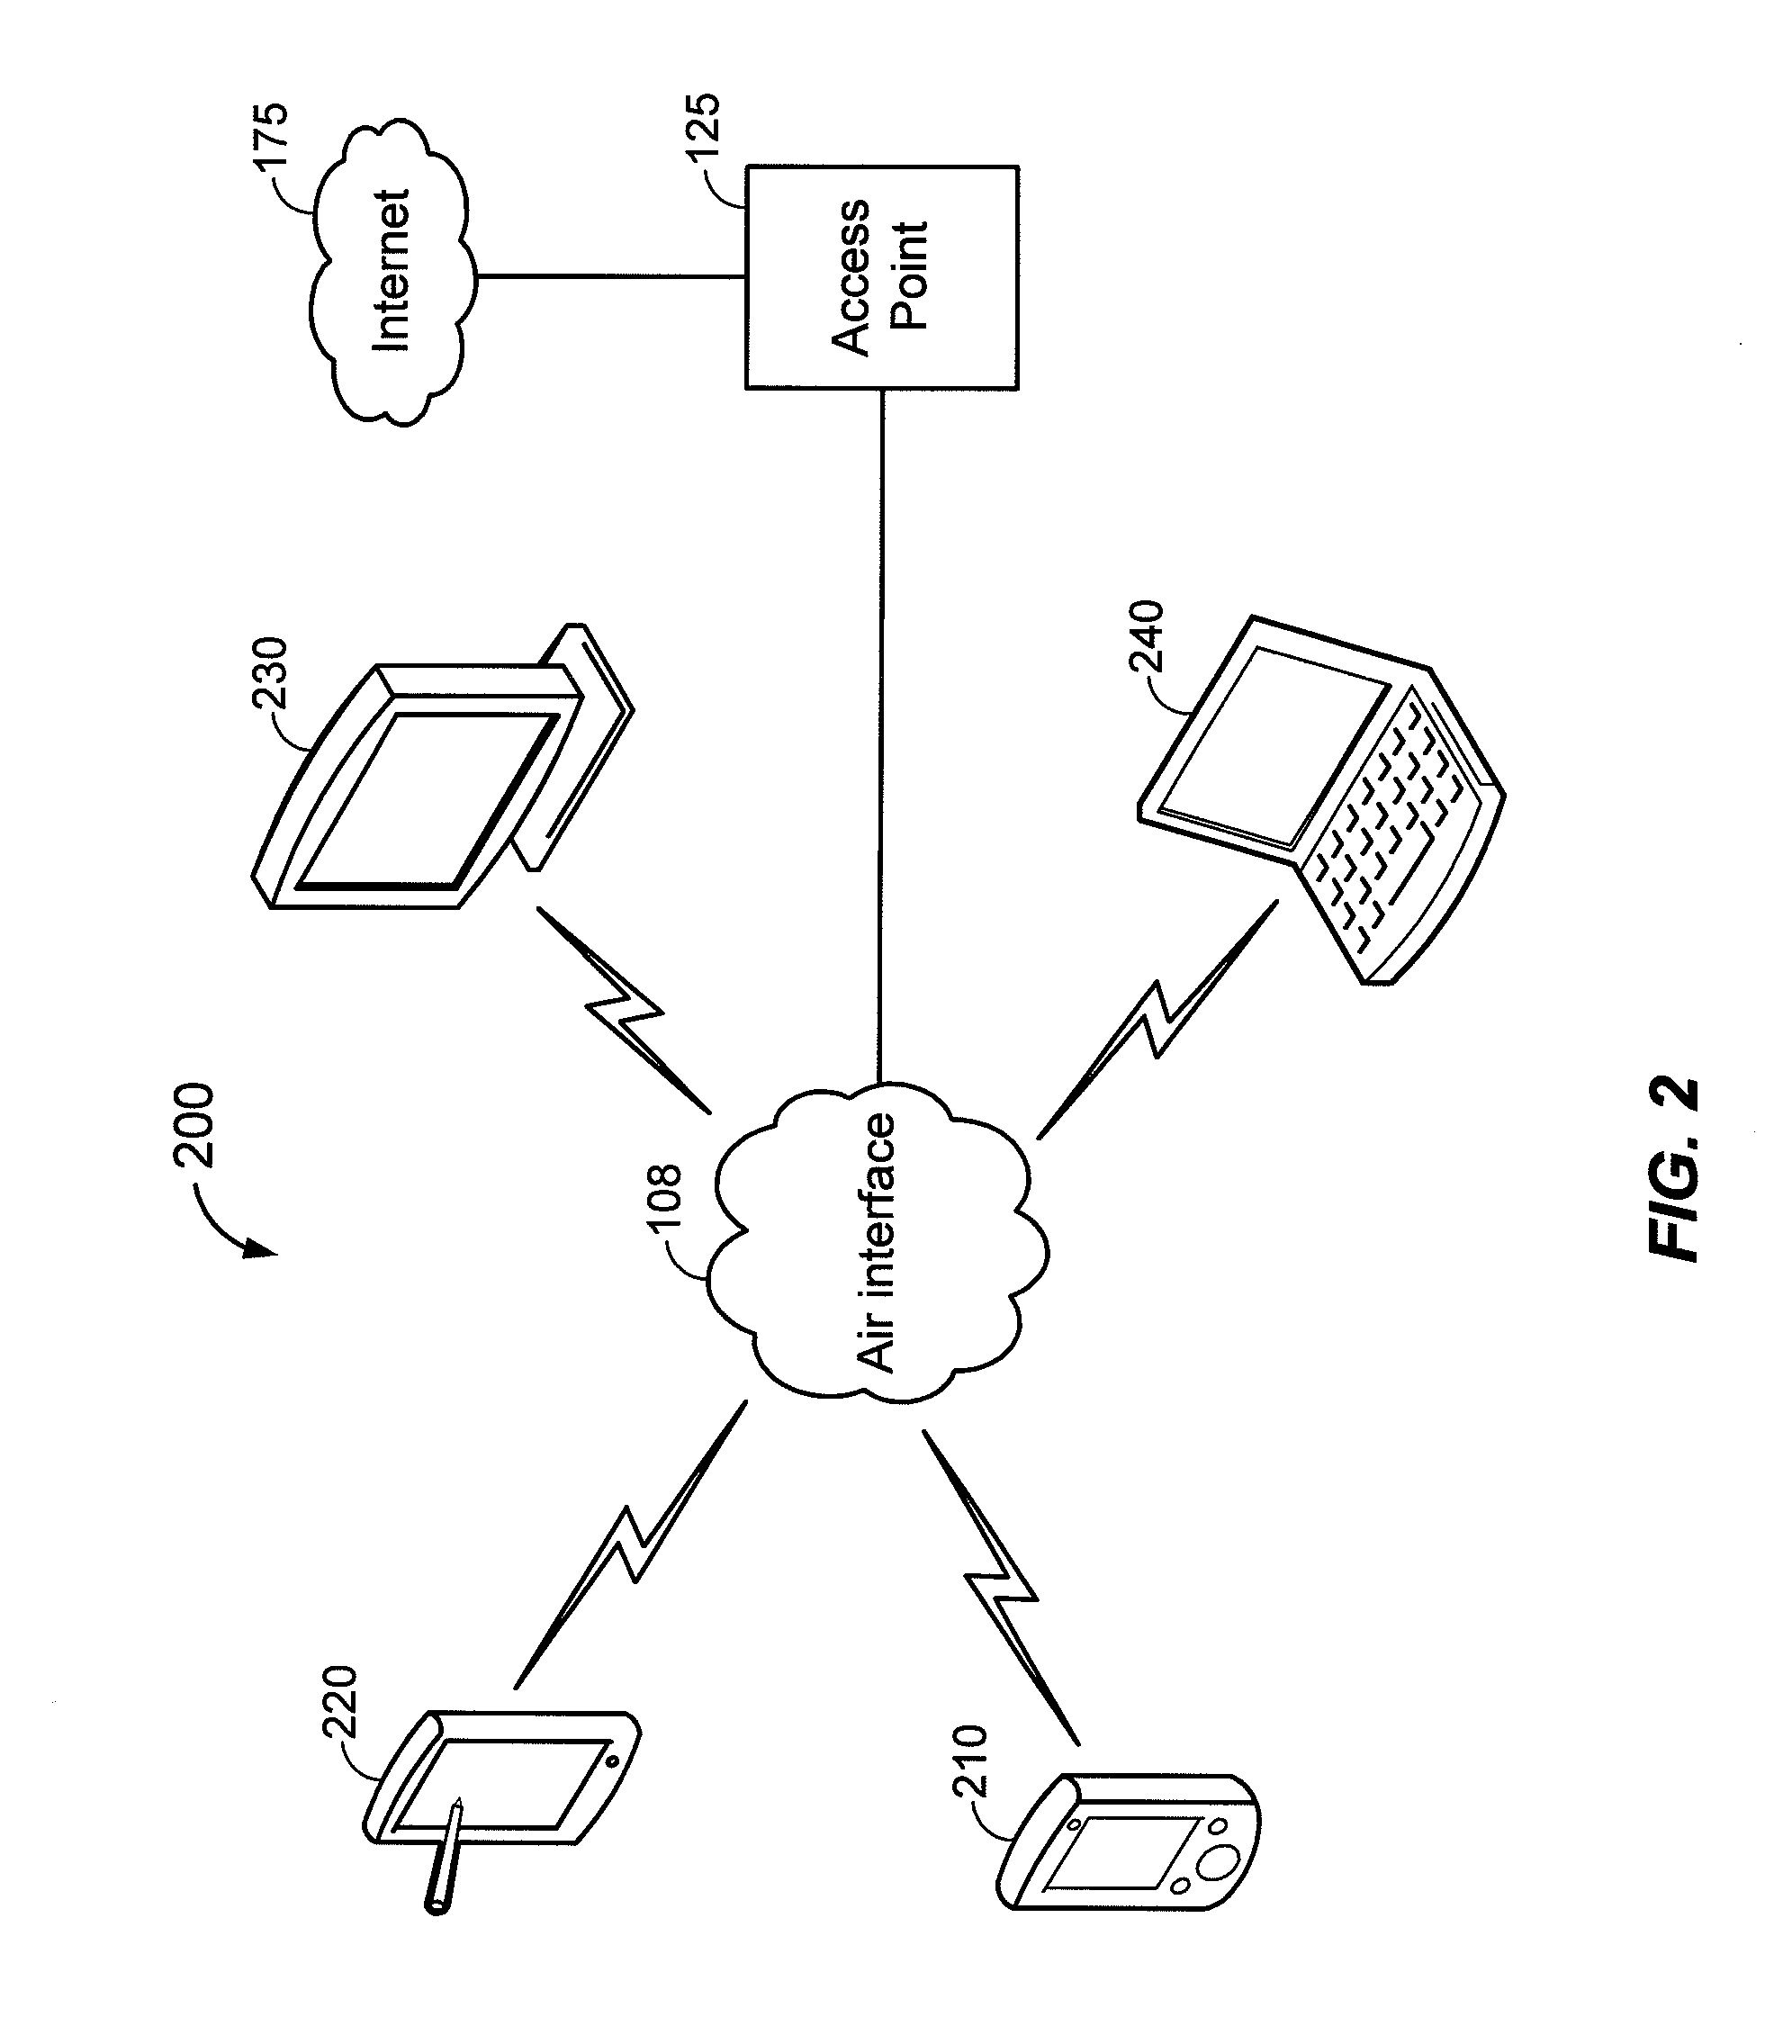 Method for storing and sharing a history of interactions between devices in a network